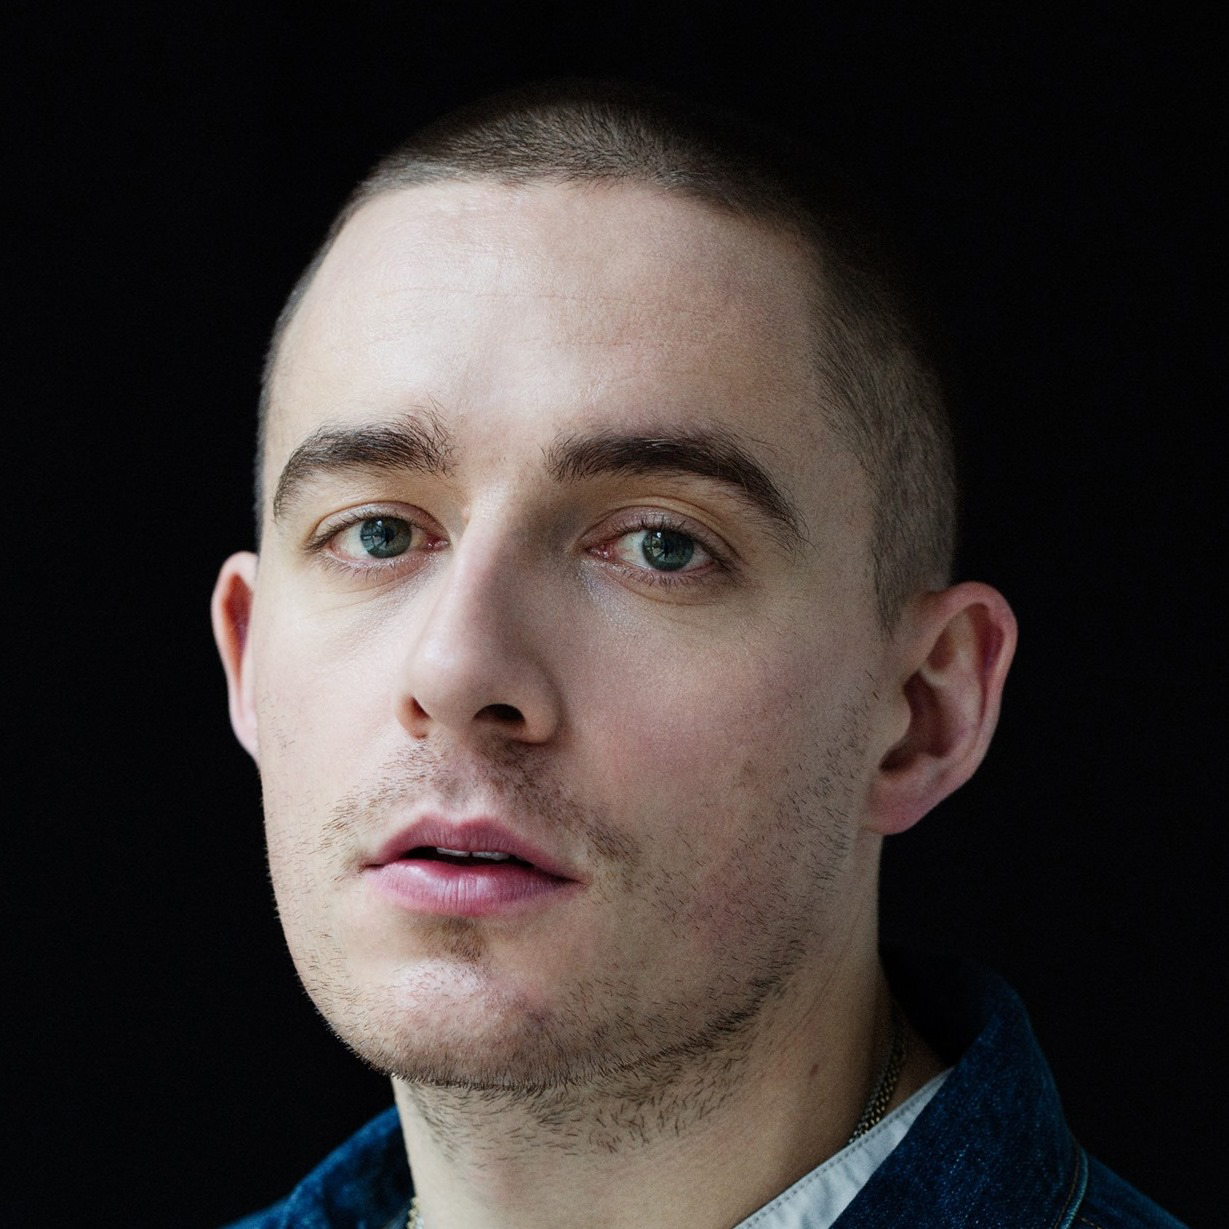 DERMOT KENNEDY announces biggest outdoor headline show in UK at Sounds Of The City 2021 